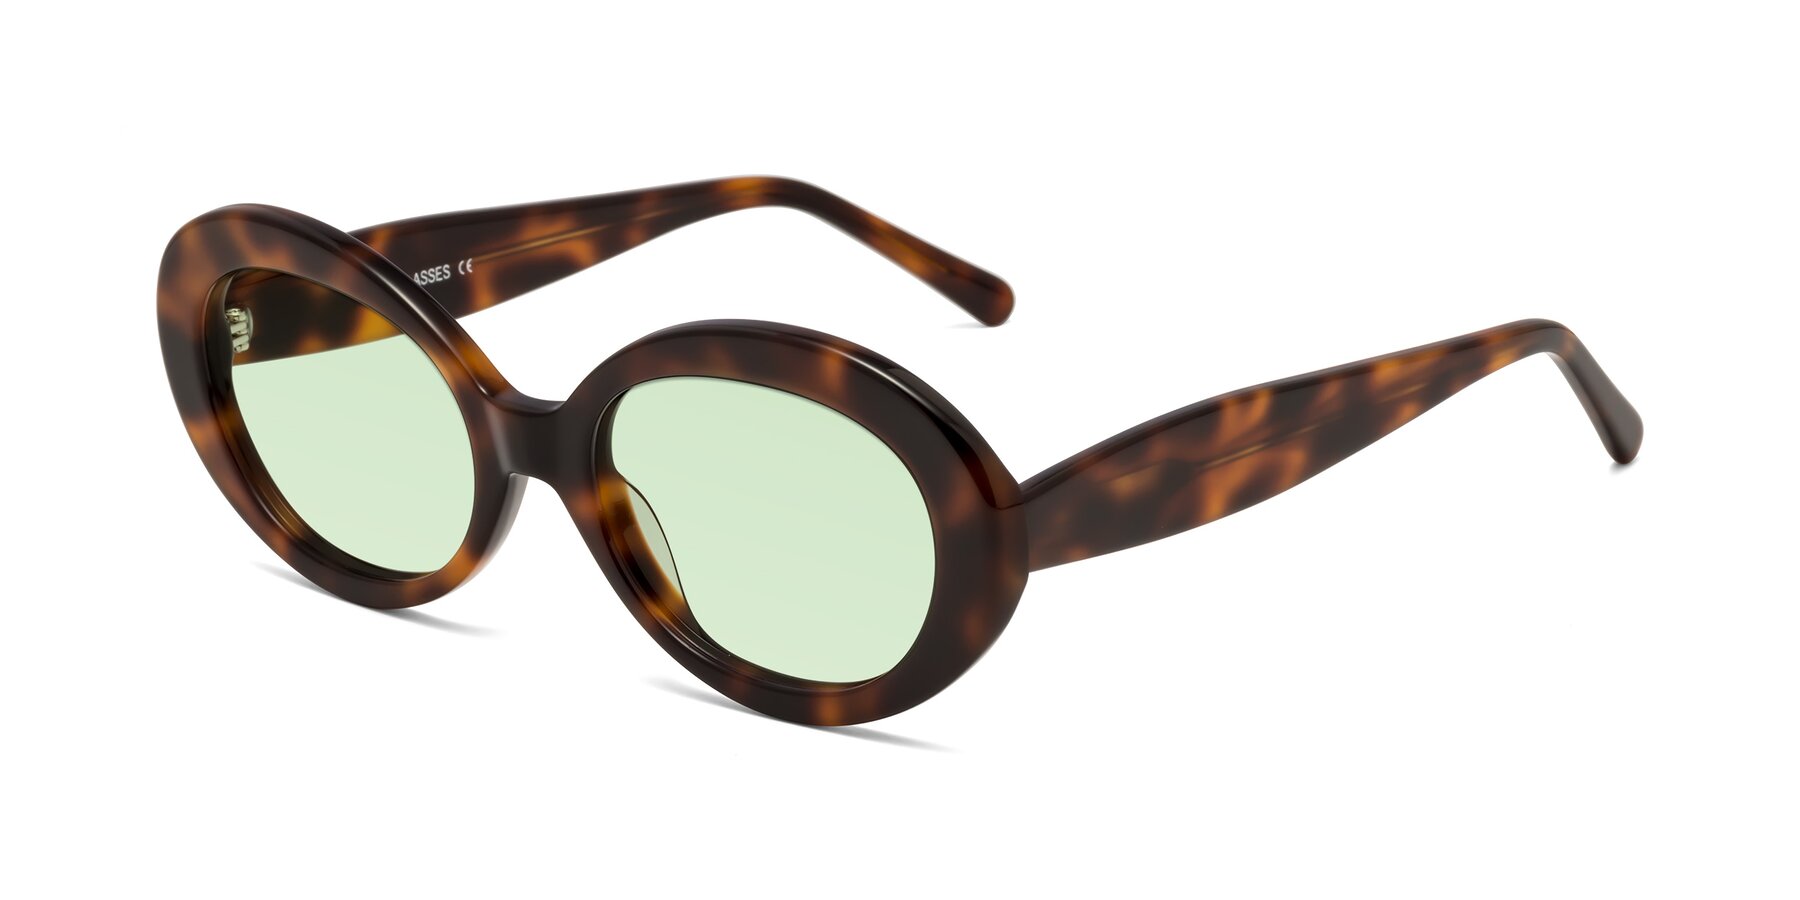 Angle of Fair in Tortoise with Light Green Tinted Lenses